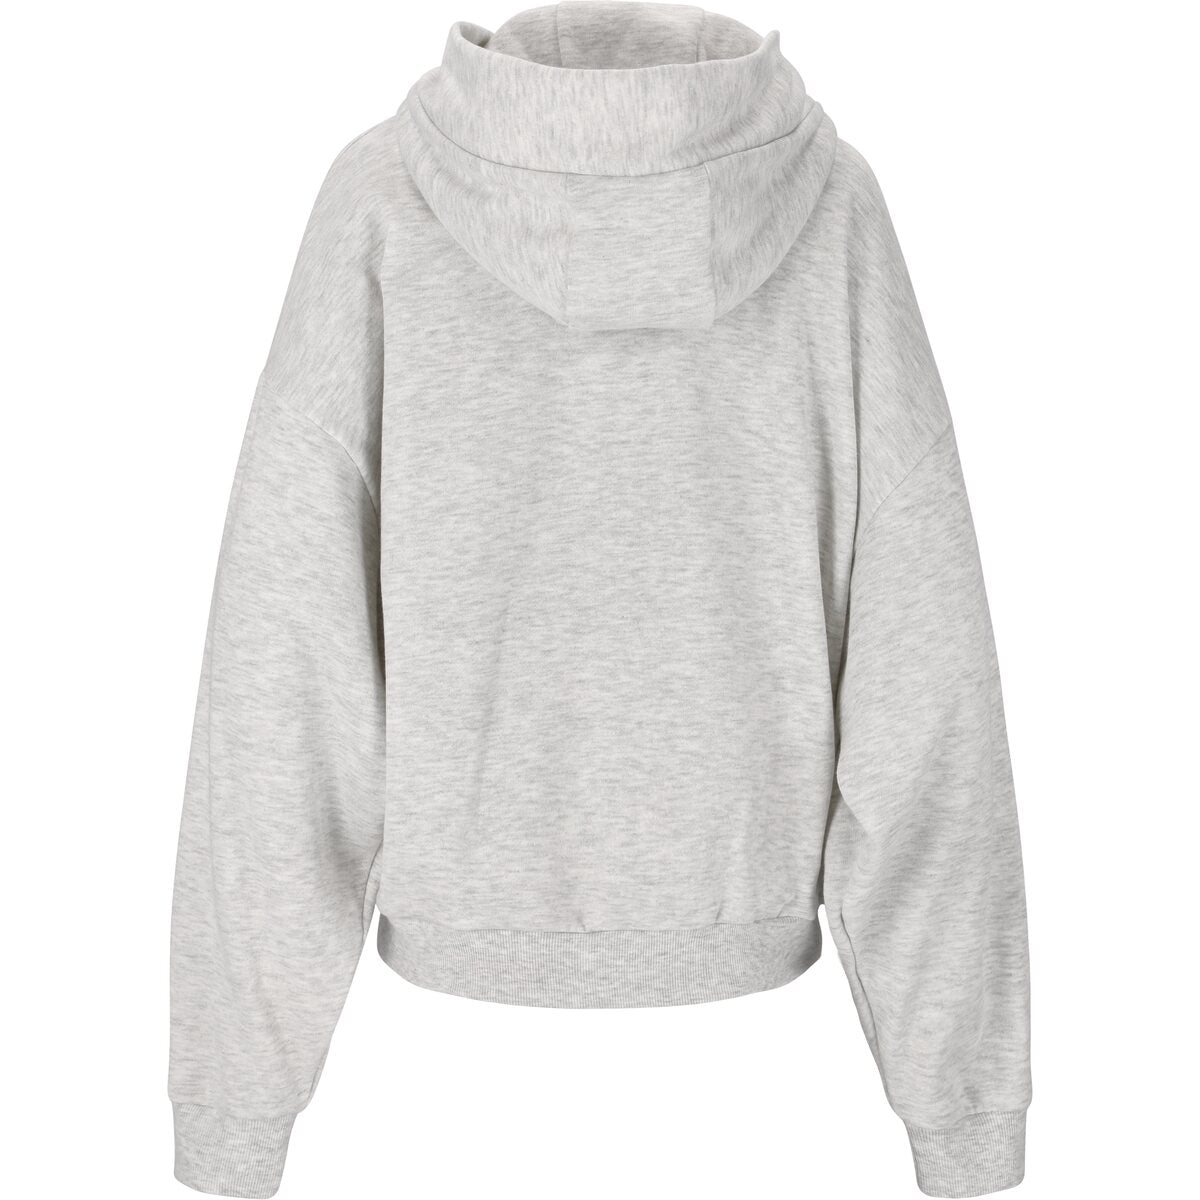 Athlecia Ruthie Womenswear Hoody 8 Shaws Department Stores